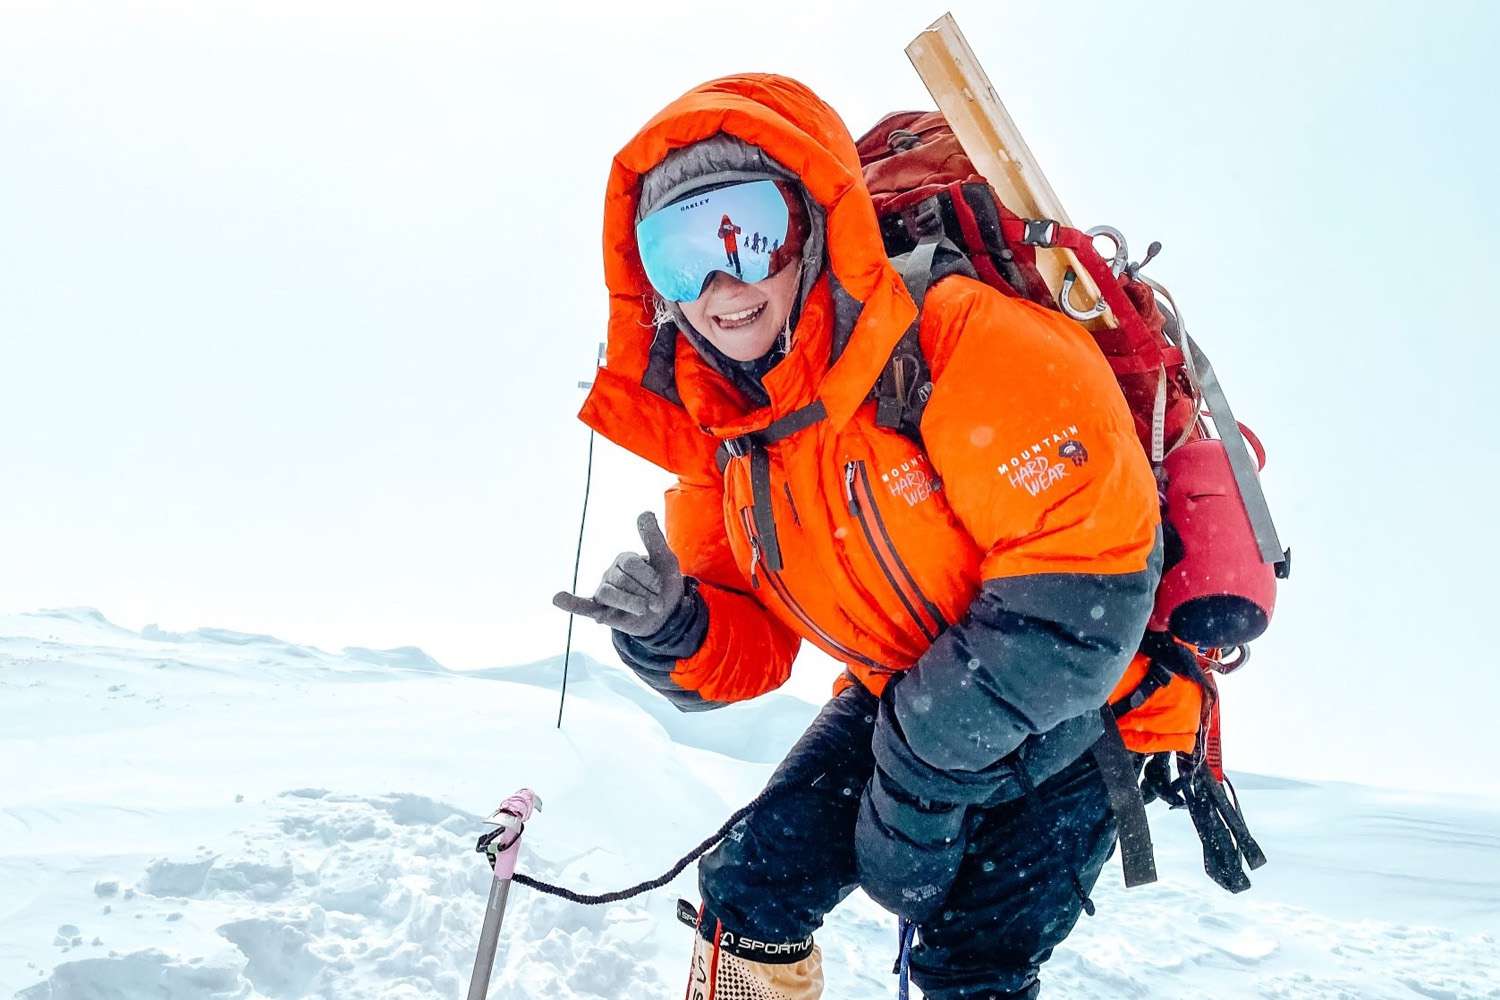 Chicago Teen Makes History as Youngest American Woman to Reach the Top of Mt. Everest